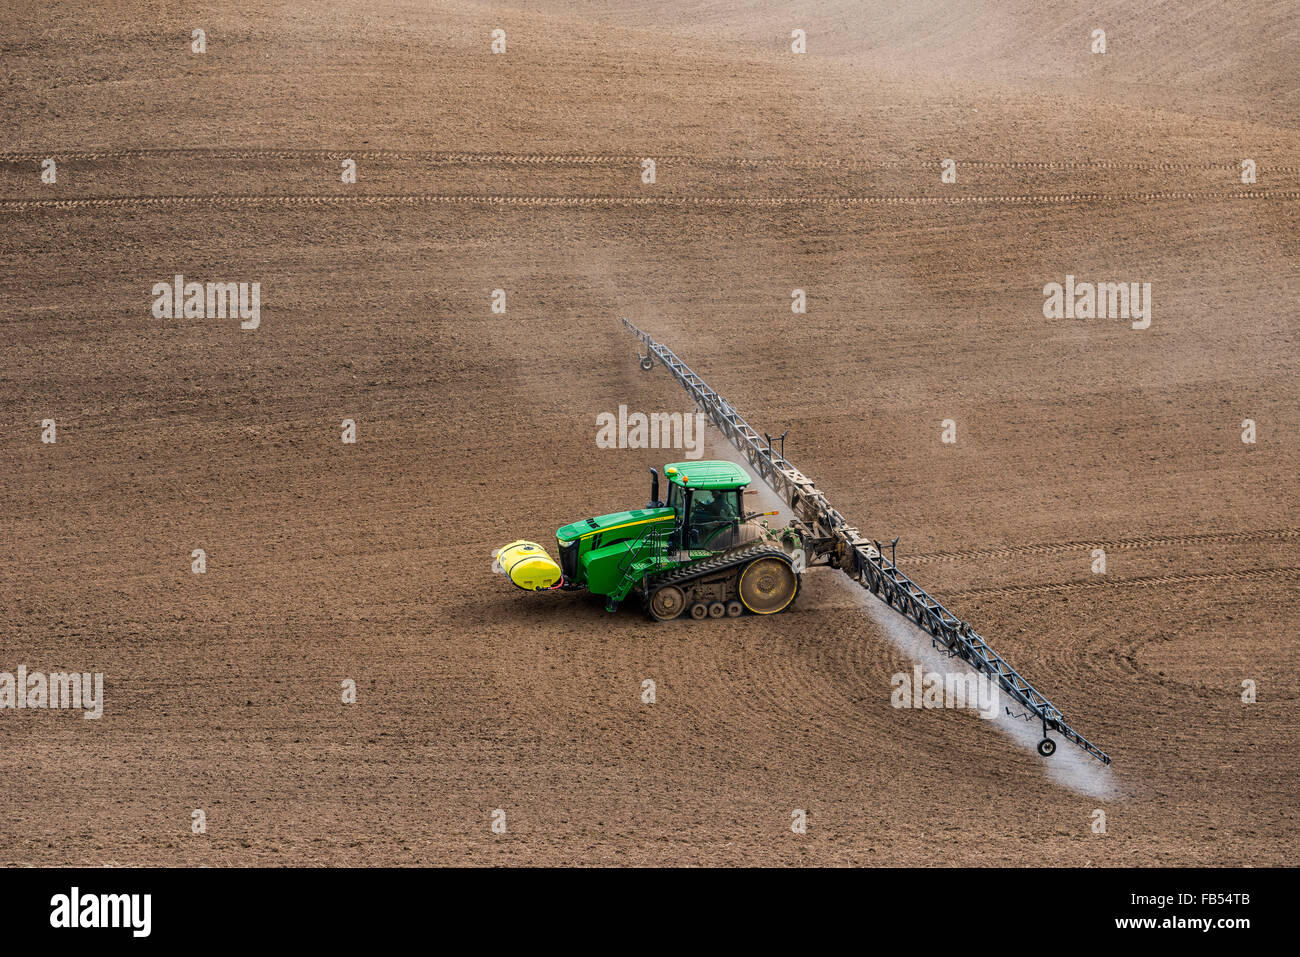 John Deere track tractor configured with spraying booms spraying fertilizer  on a garbonzo bean seedbed in the Palouse region of Stock Photo - Alamy